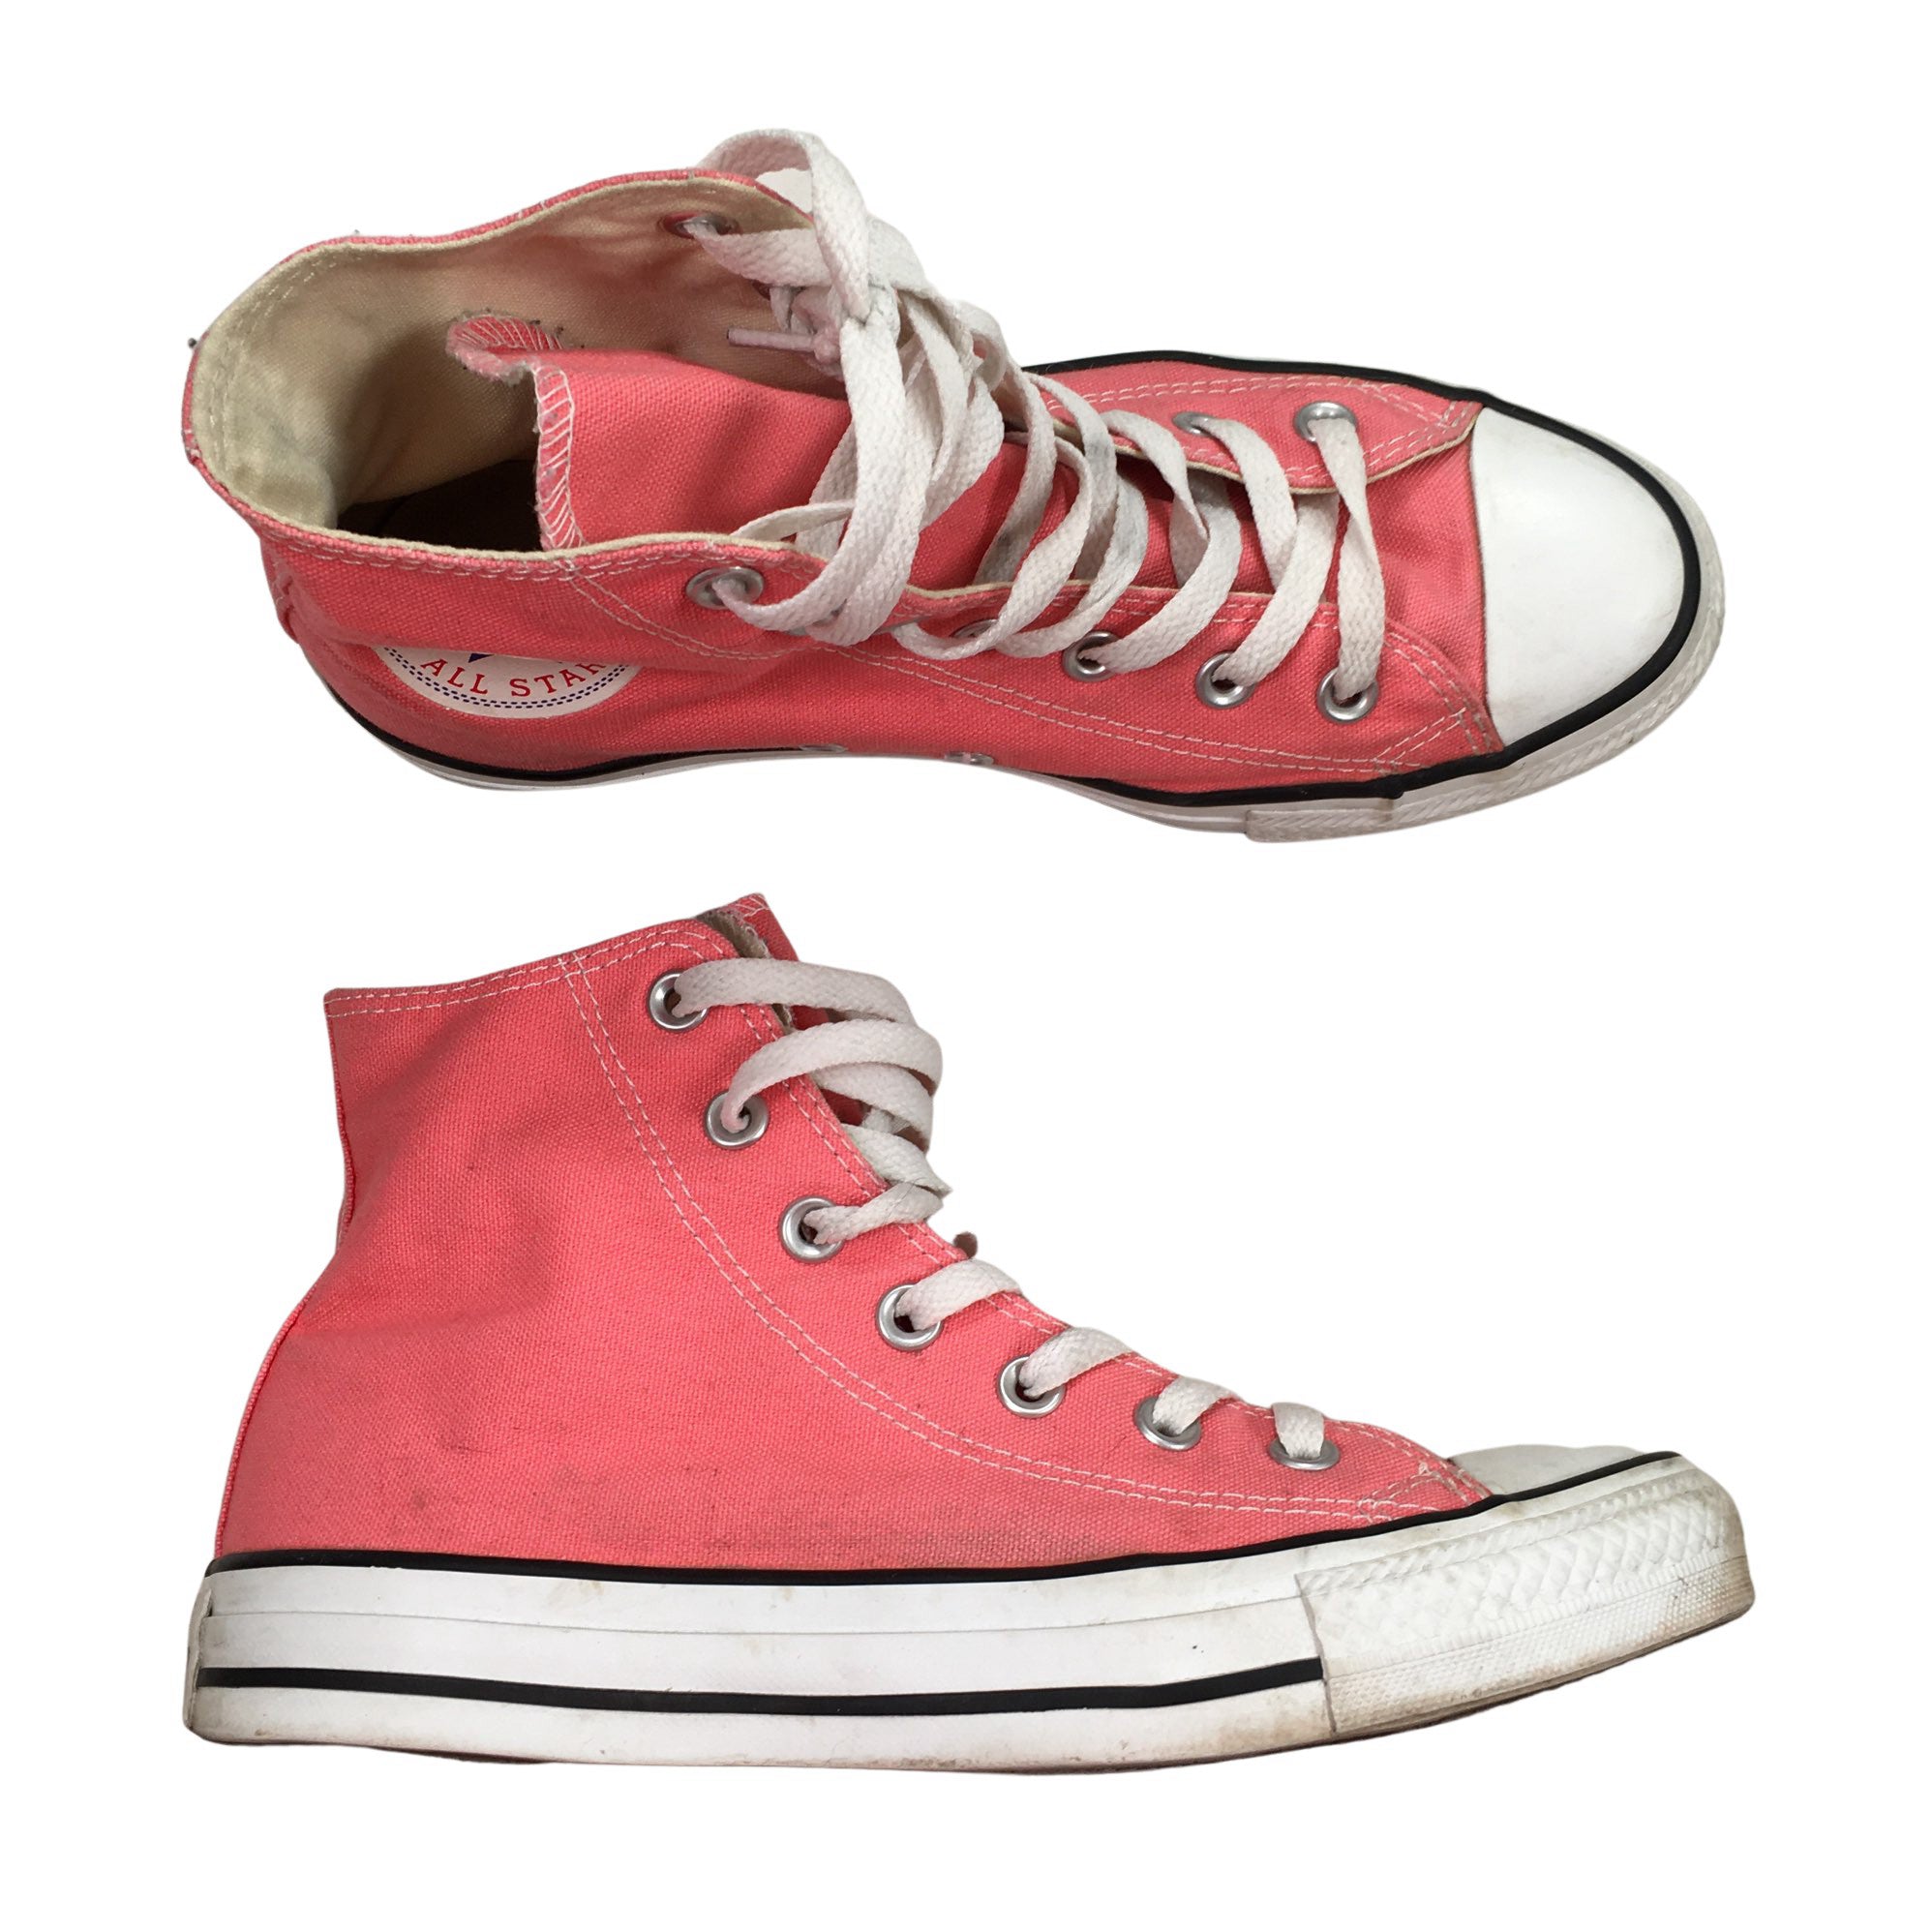 Unisex Casual sneakers, size 39 (Pink) | Emmy